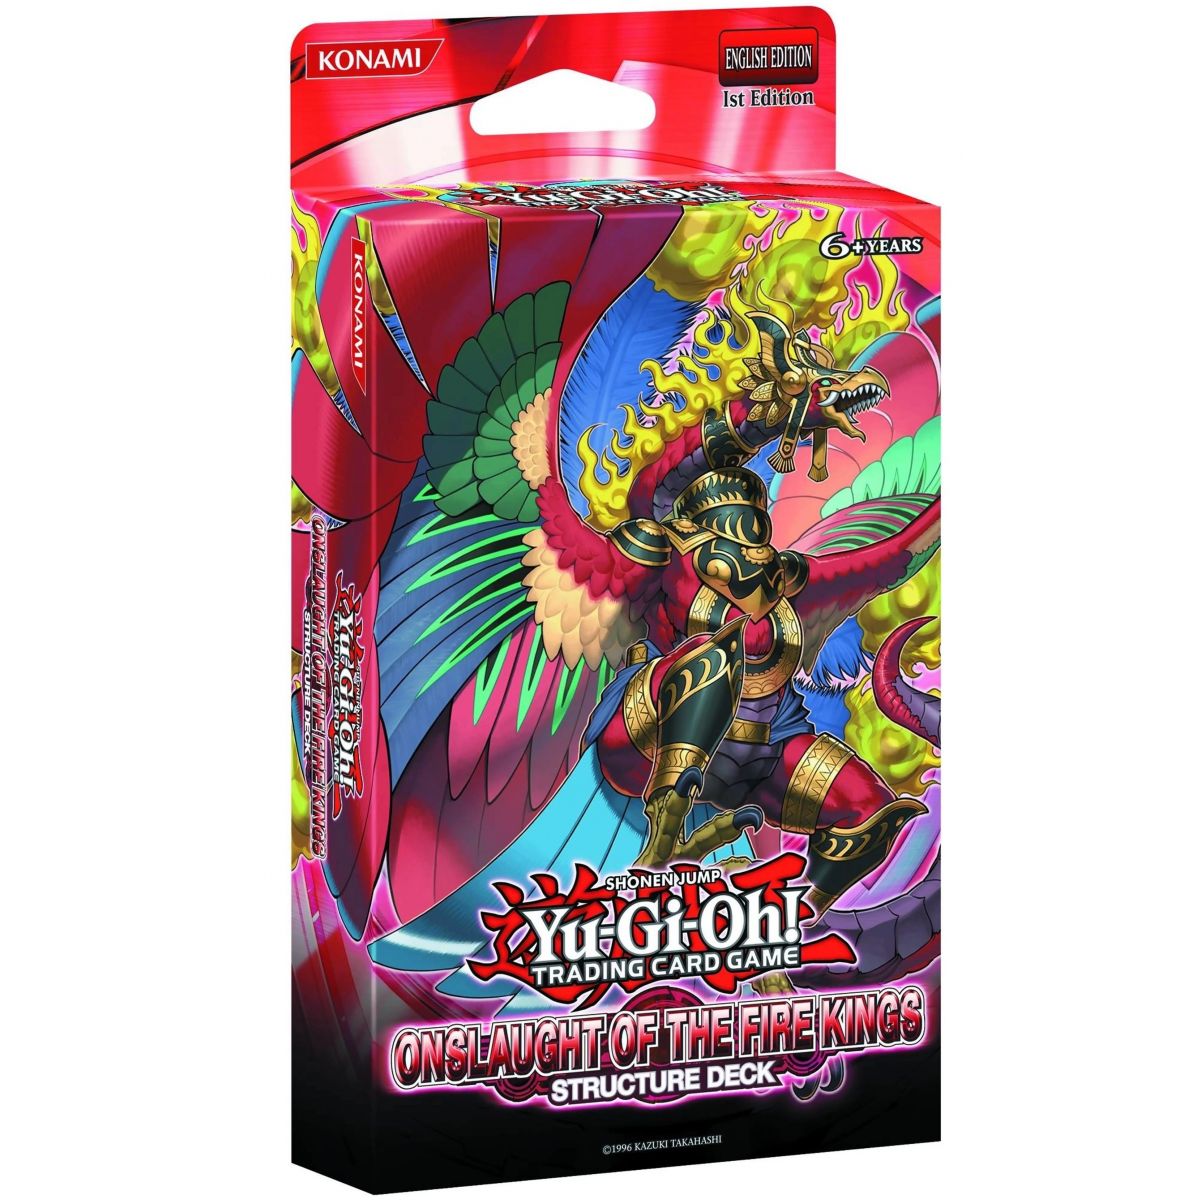 *US-Druck VERSIEGELT* Yu-Gi-Oh! Structure Deck – Onslaught of The Fire Kings – 1. Auflage